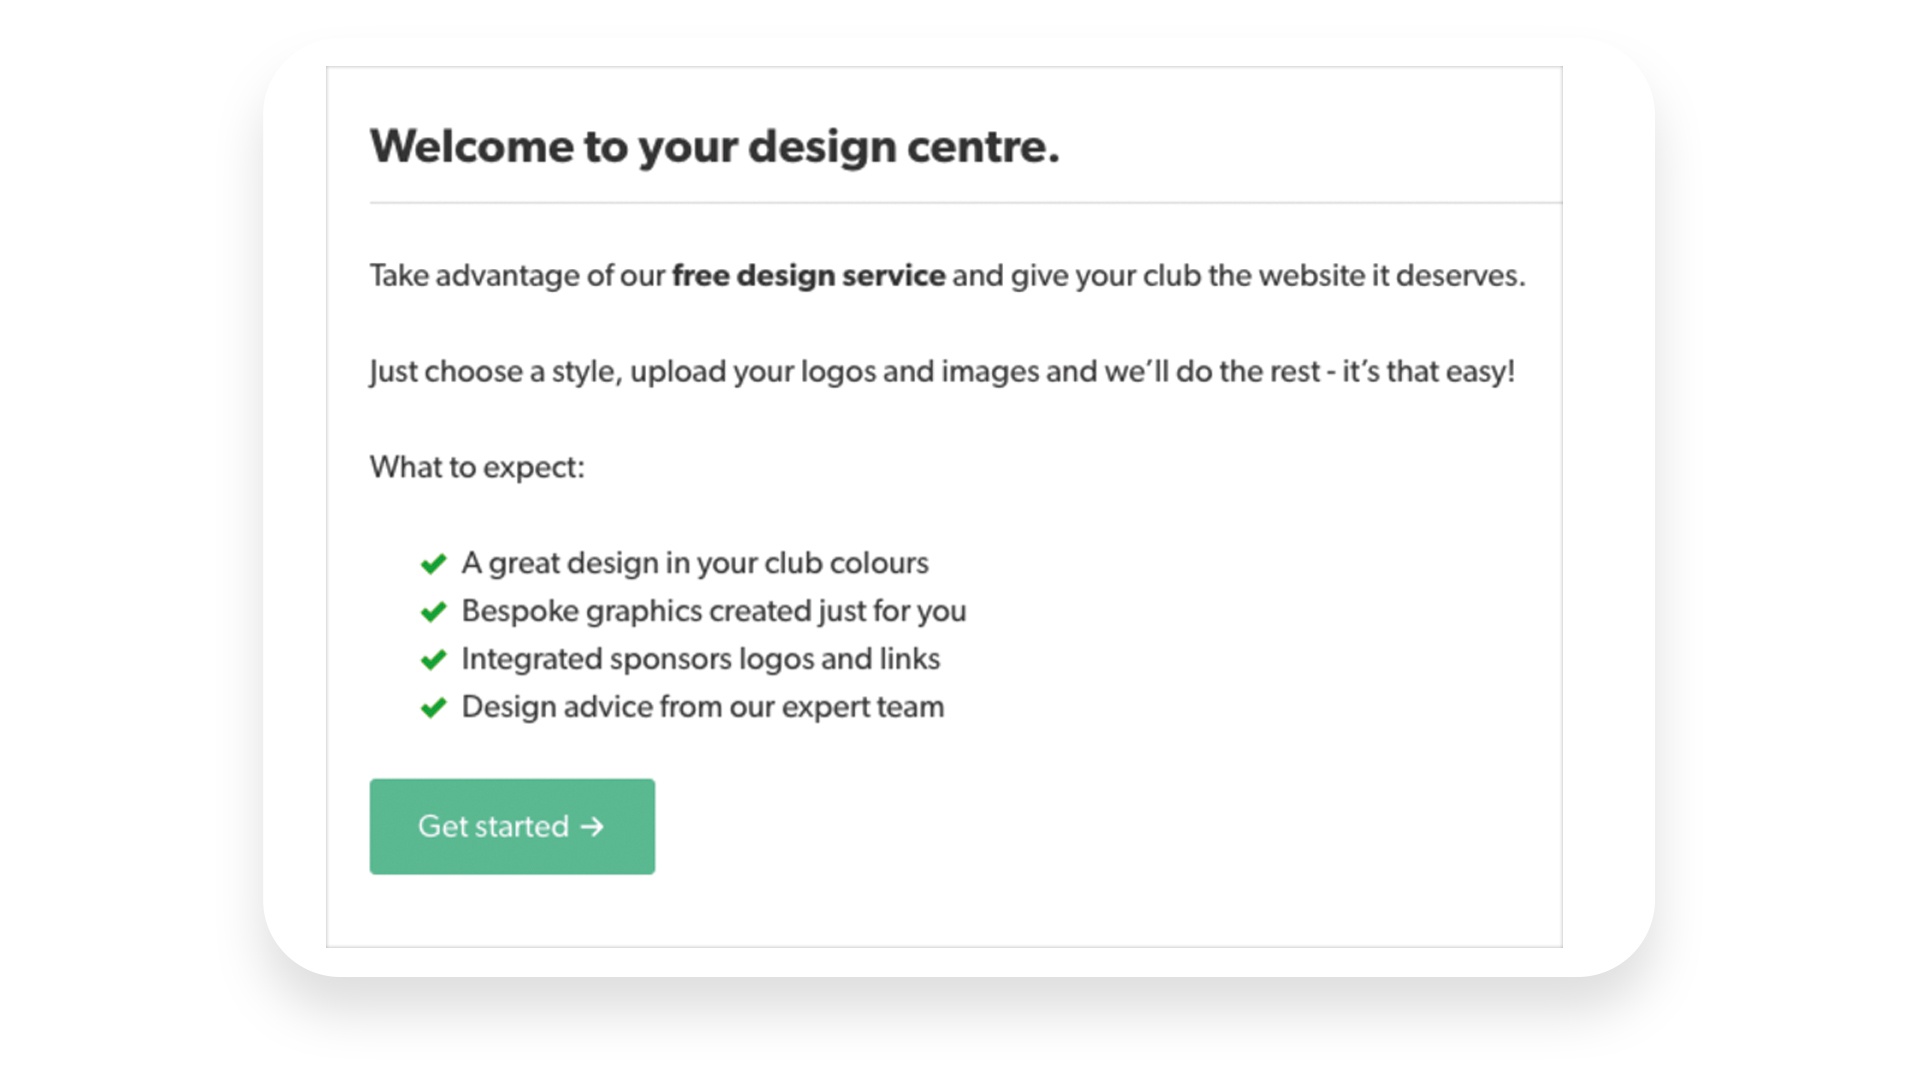 welcome_to_your_design_centre.jpg